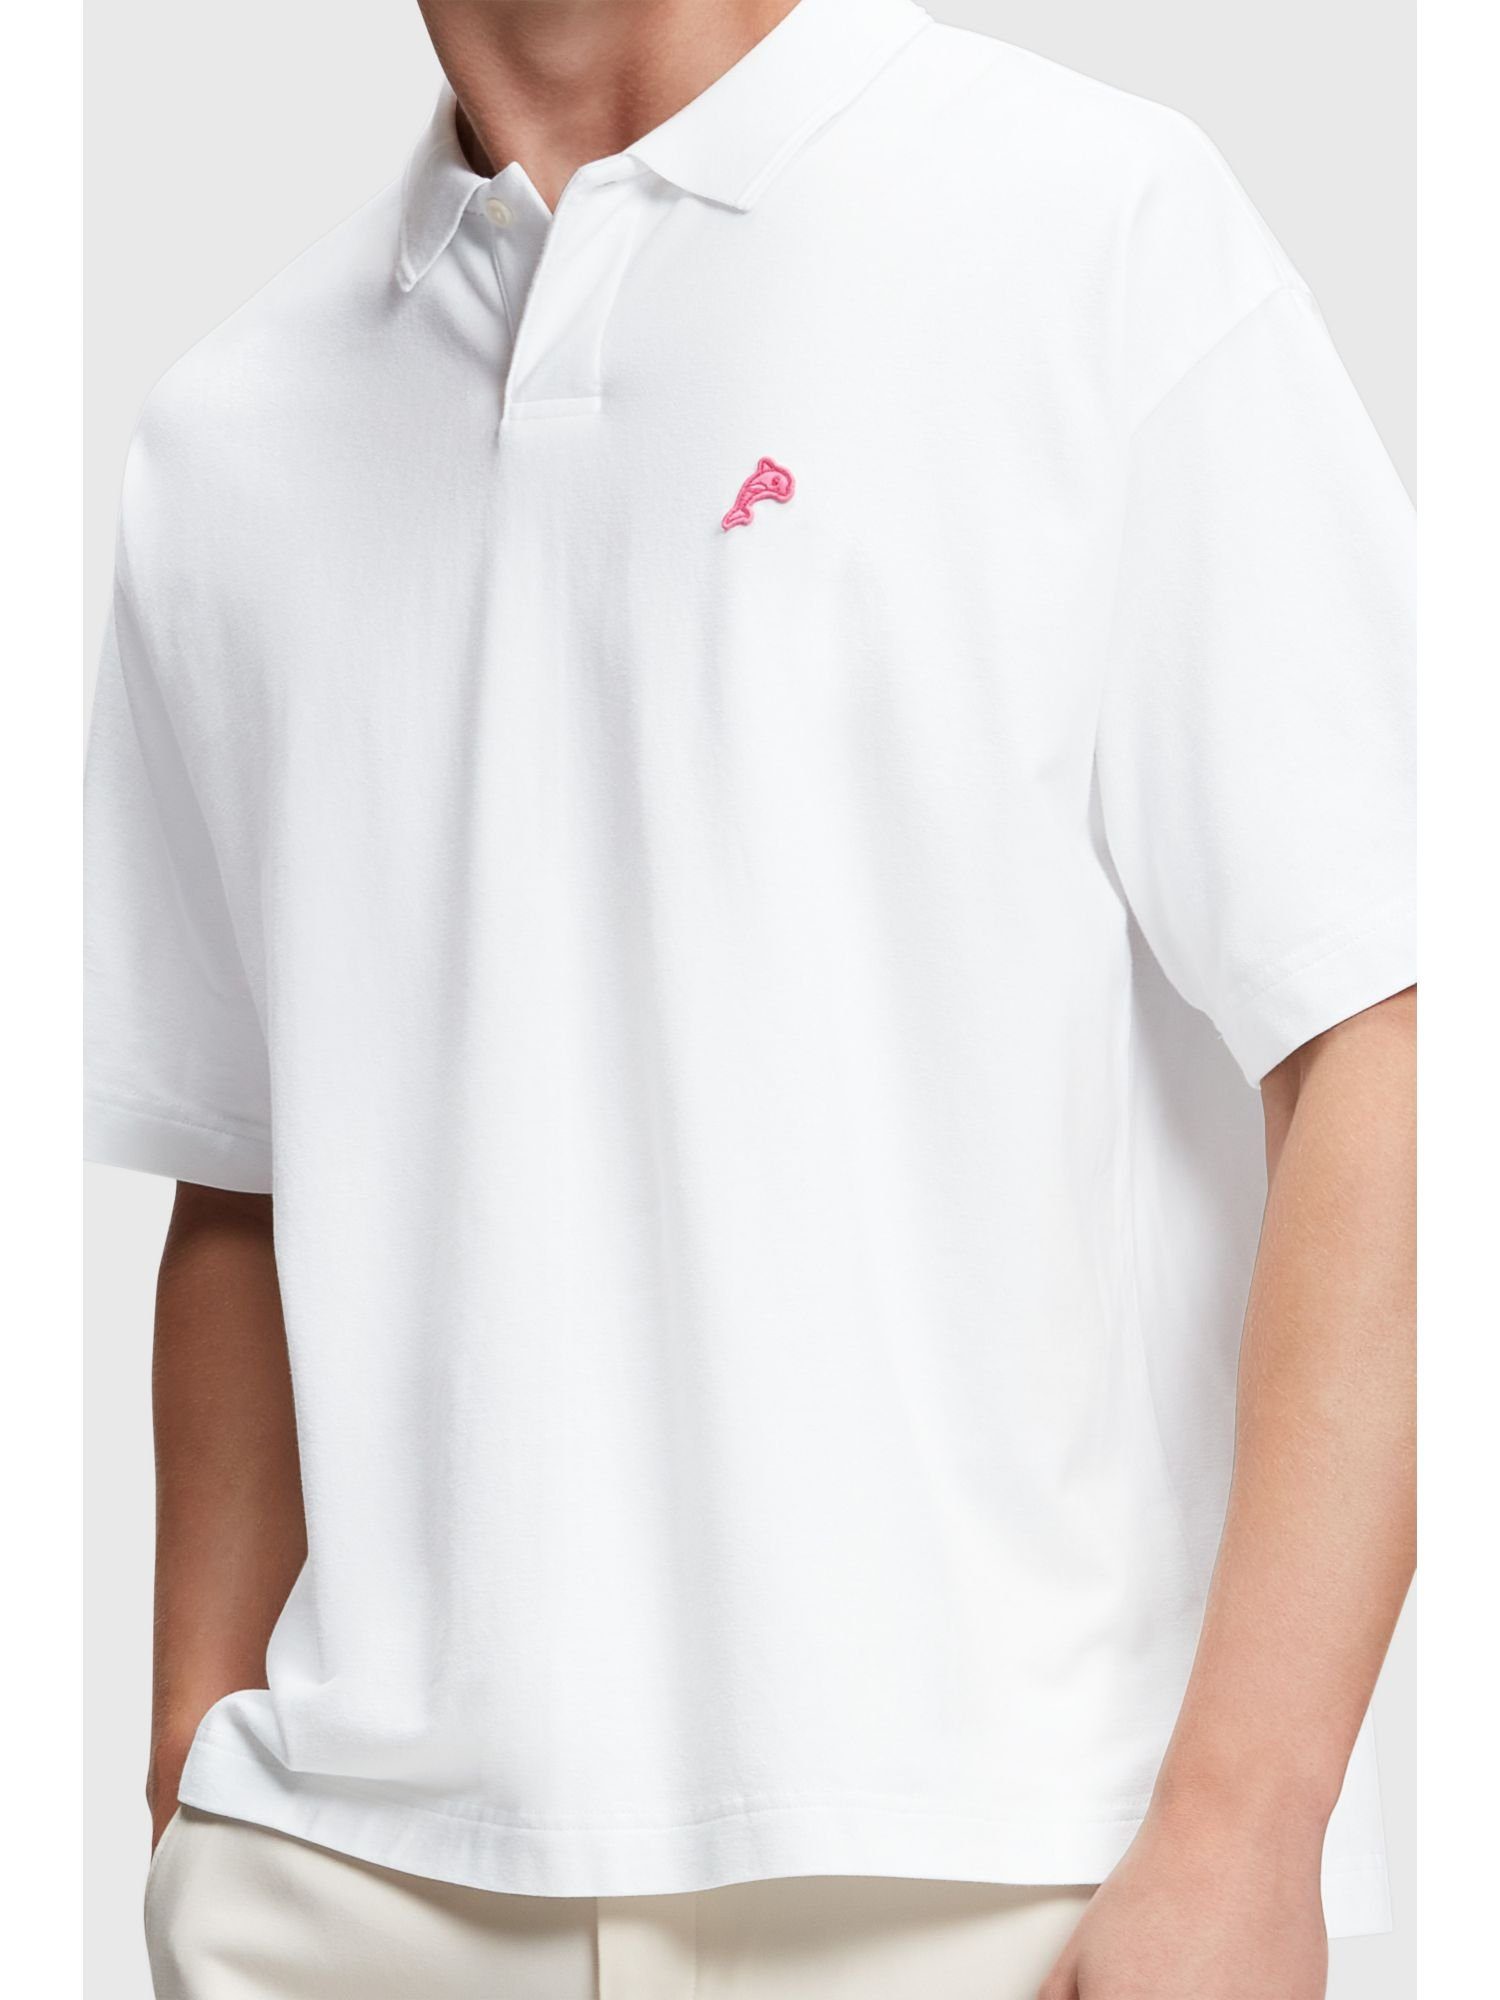 Poloshirt Esprit Dolphin-Badge mit Relaxed WHITE Fit Poloshirt